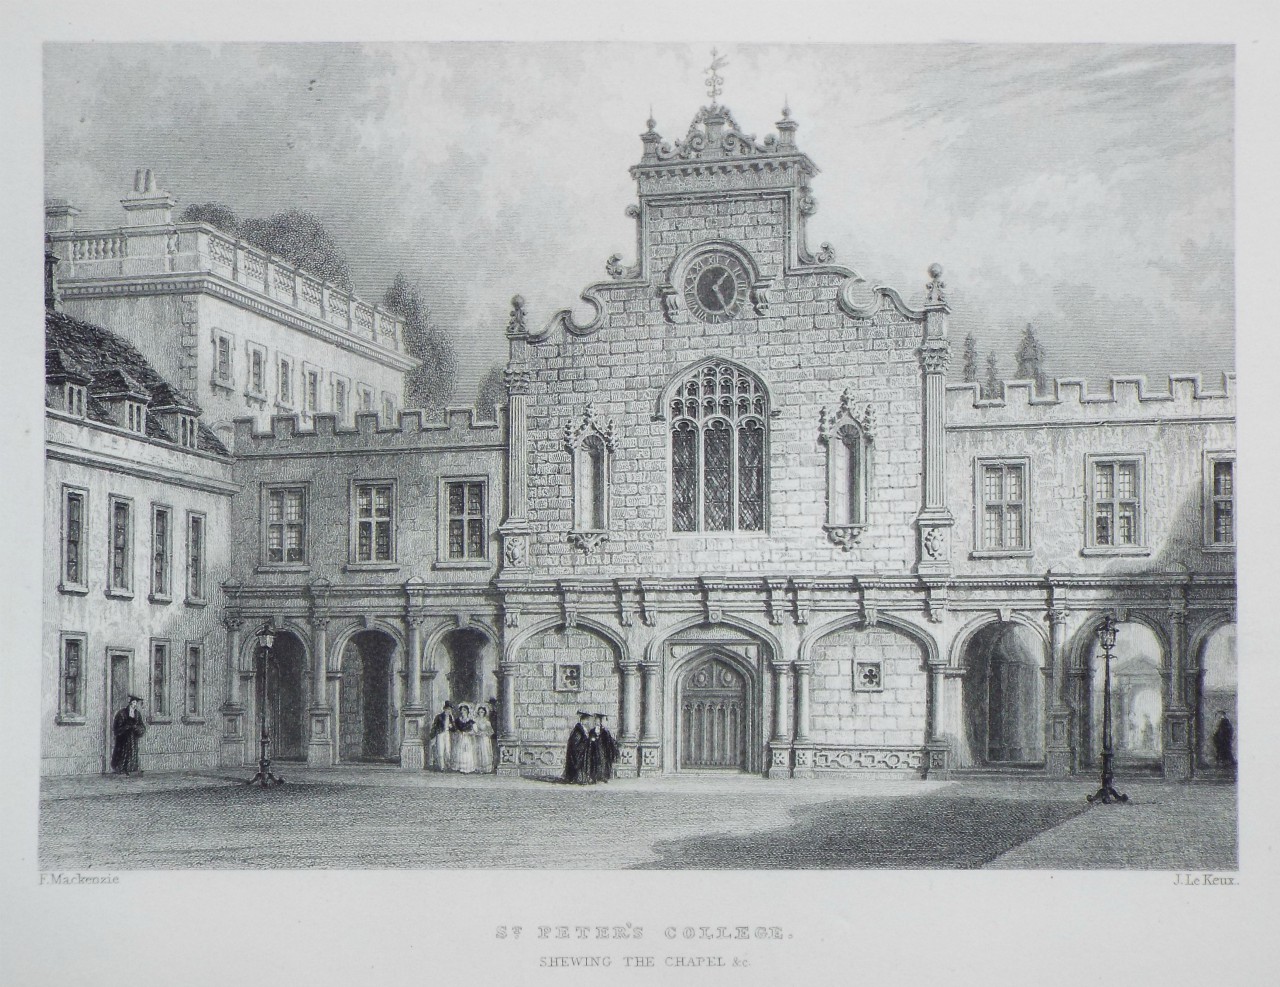 Print - St. Peter's College, shewing the Chapel &c.